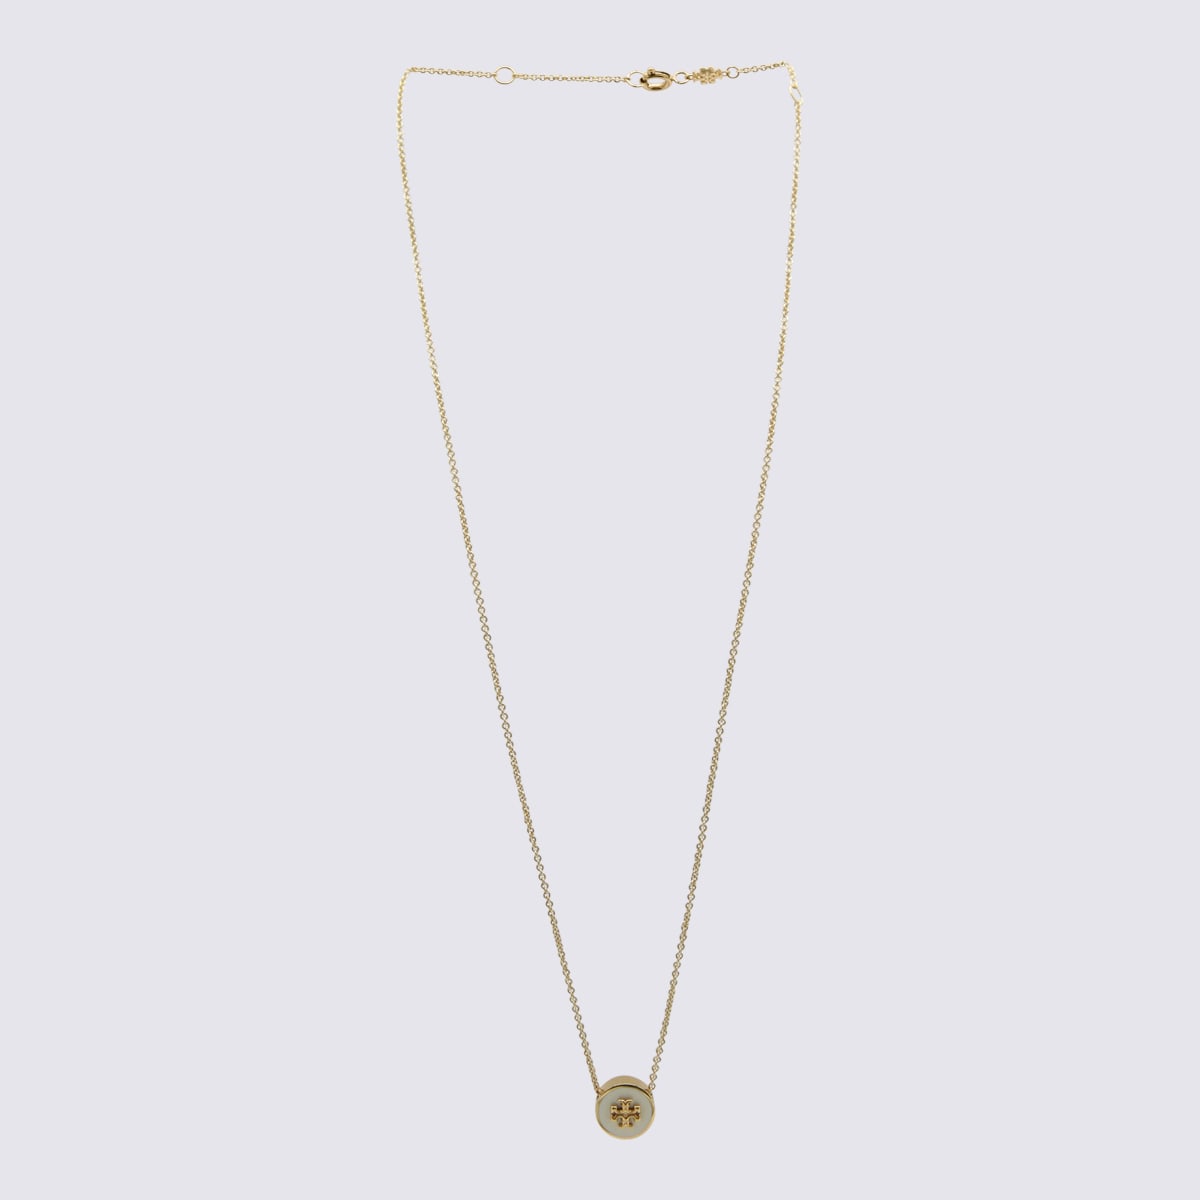 Gold Tone Metal Necklace